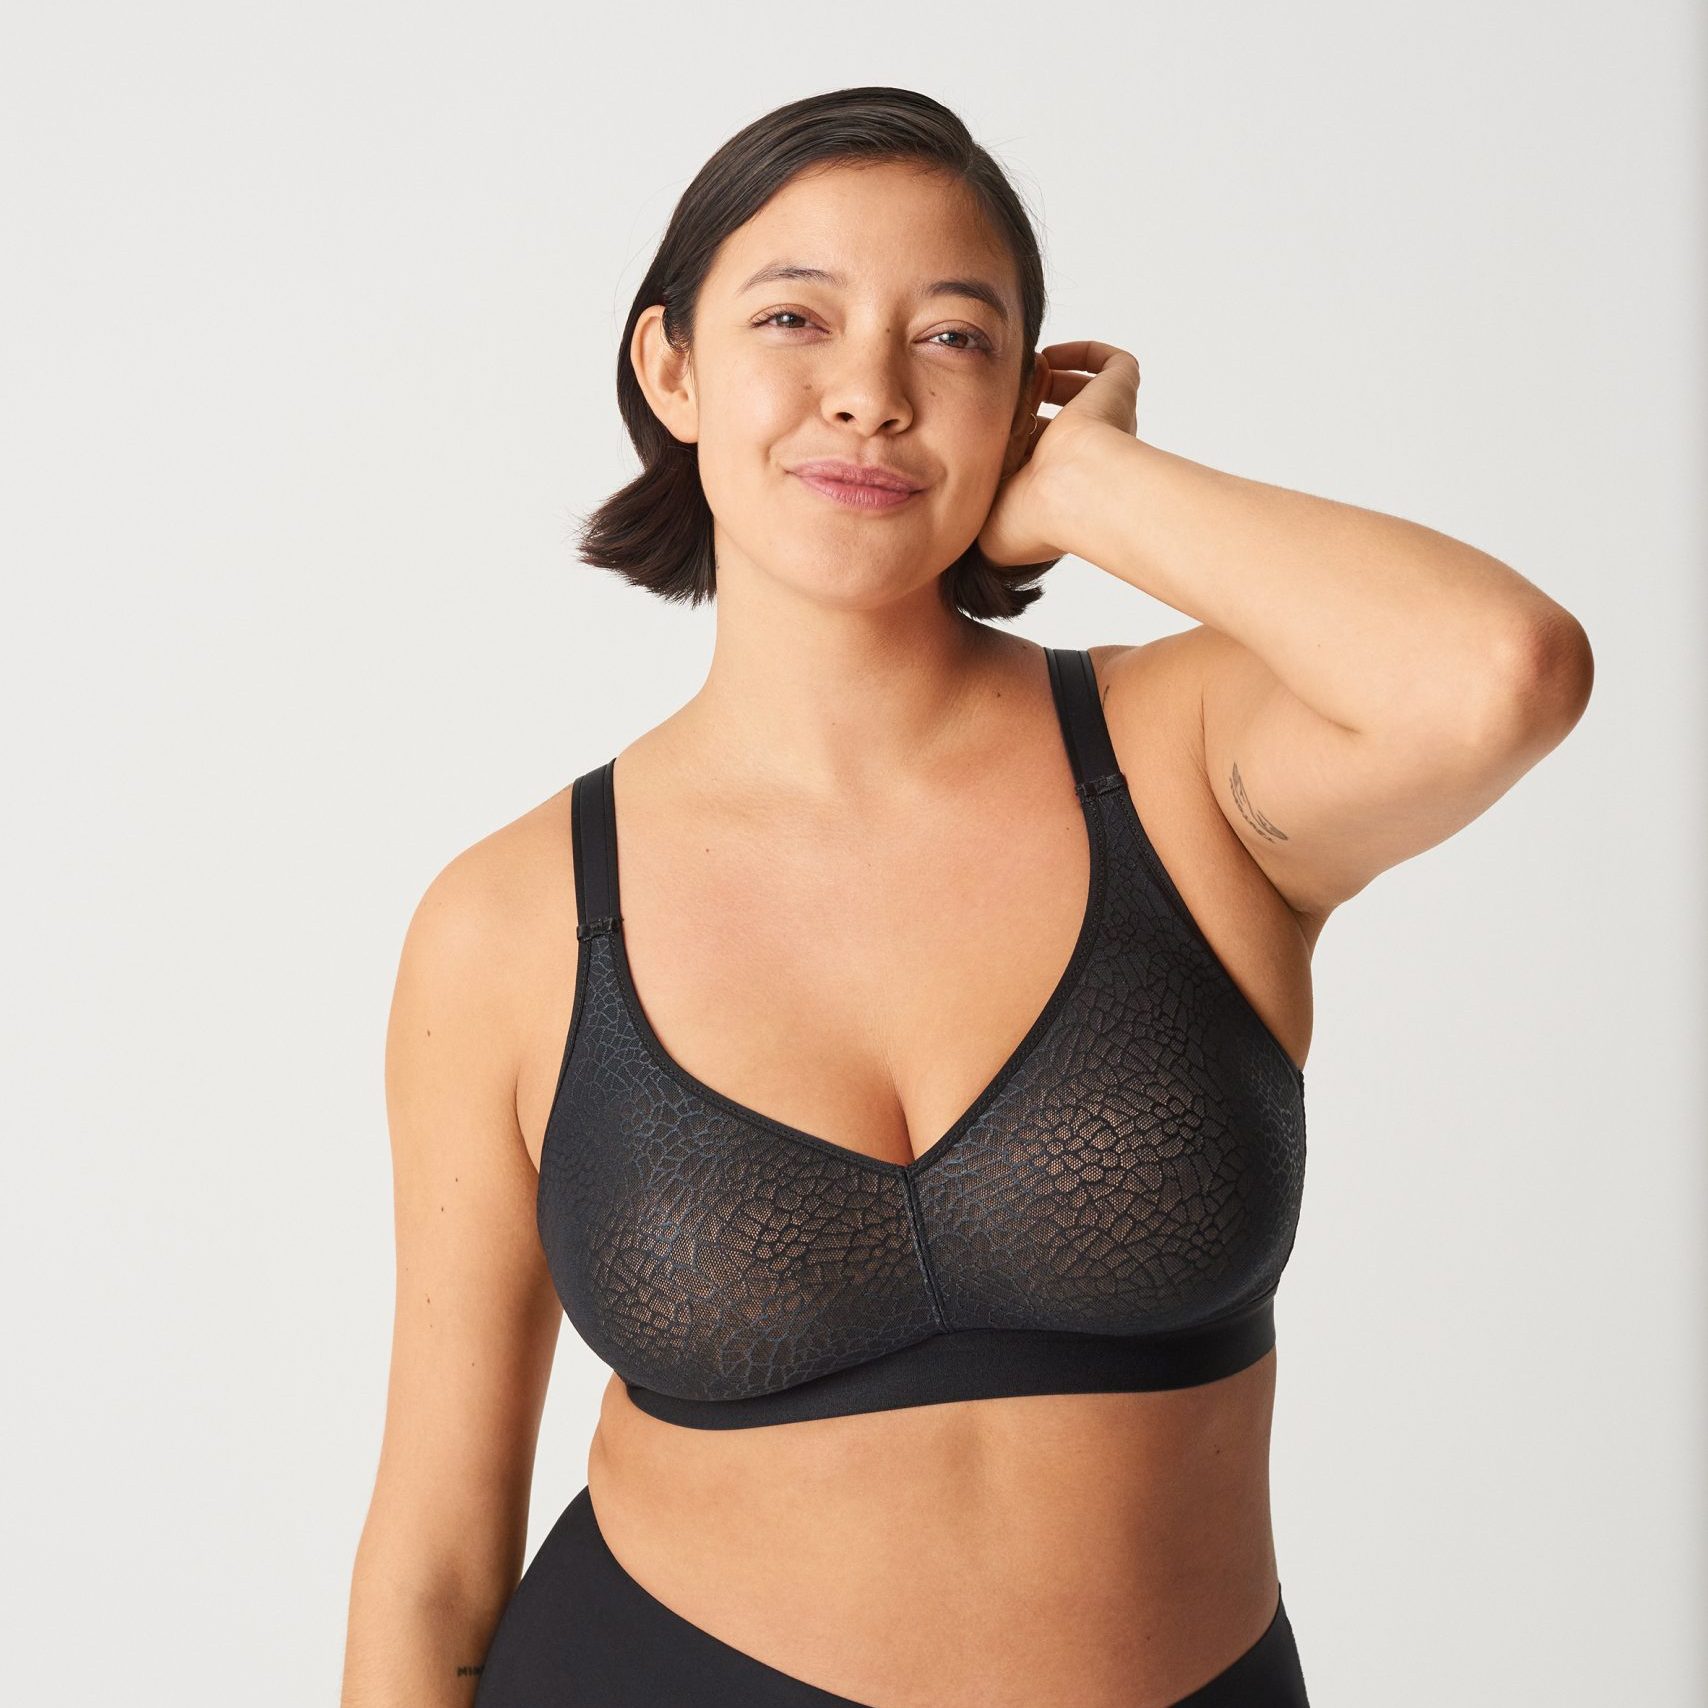 https://www.perfectfitlingerie.ca/wp-content/uploads/2020/10/C1892MAGNIFIQUE-WIREFREE_SUPPORT_BRA-scaled-e1604167197876.jpg